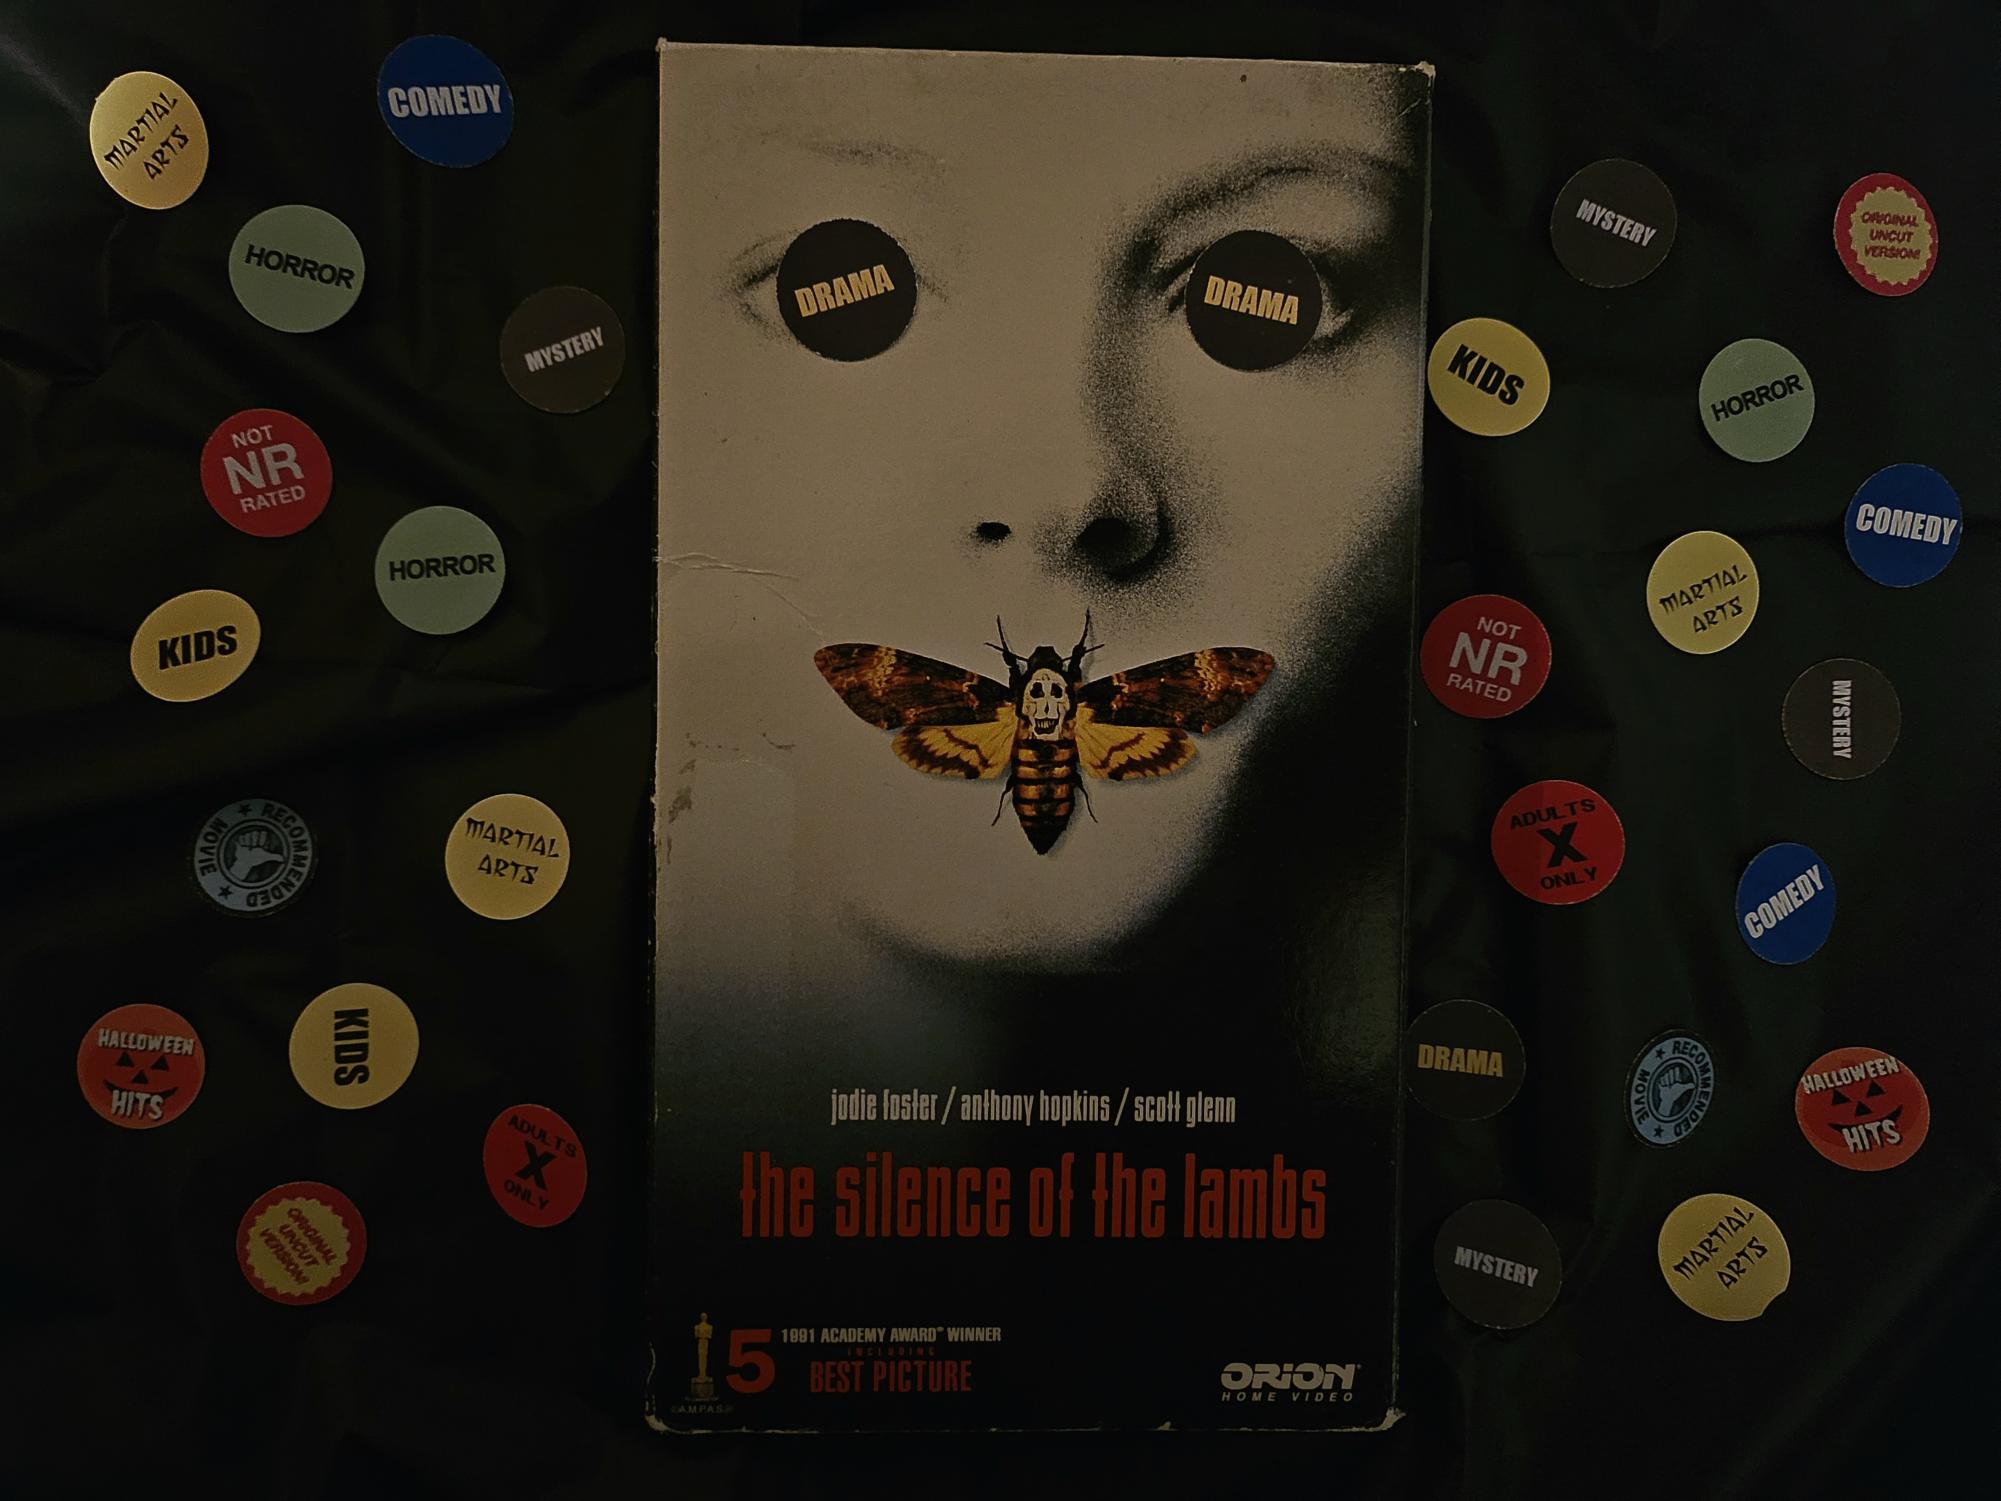 32 years after The Silence of the Lambs initial release, critics and general audiences still cant make up their minds on what genre the film should be considered. Hulu categorizes it under mystery, while Amazon Prime Video and Max label it drama/horror. On the films official IMDb page, its a crime, drama, and thriller movie. 